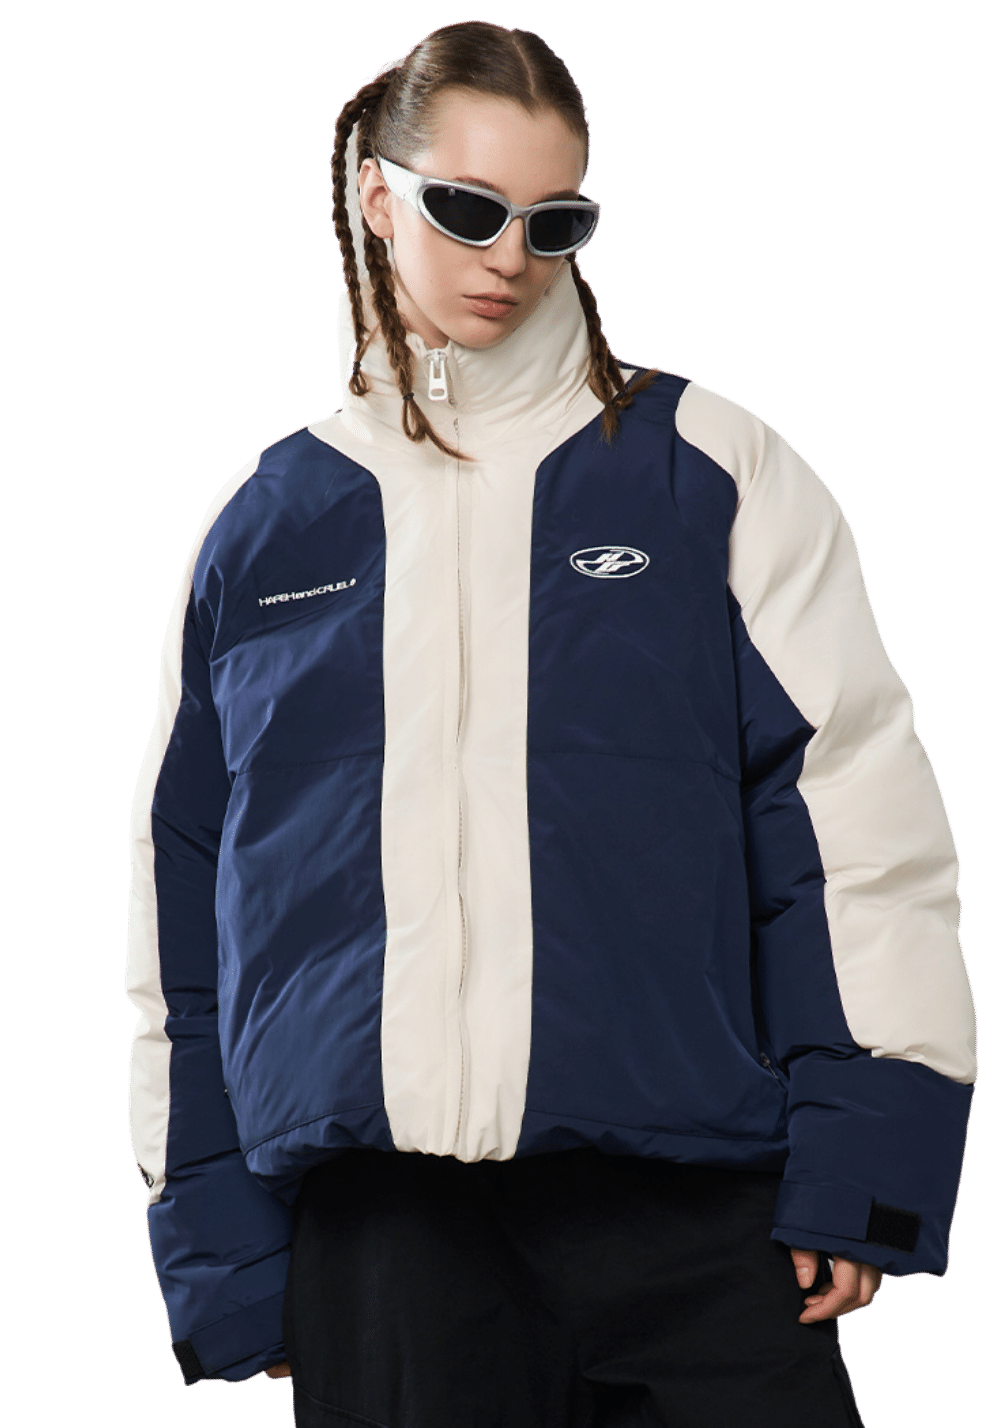 Embroidered Racing Style Padded Jacket - PSYLOS 1, Embroidered Racing Style Padded Jacket, Jacket, HARSH AND CRUEL, PSYLOS 1